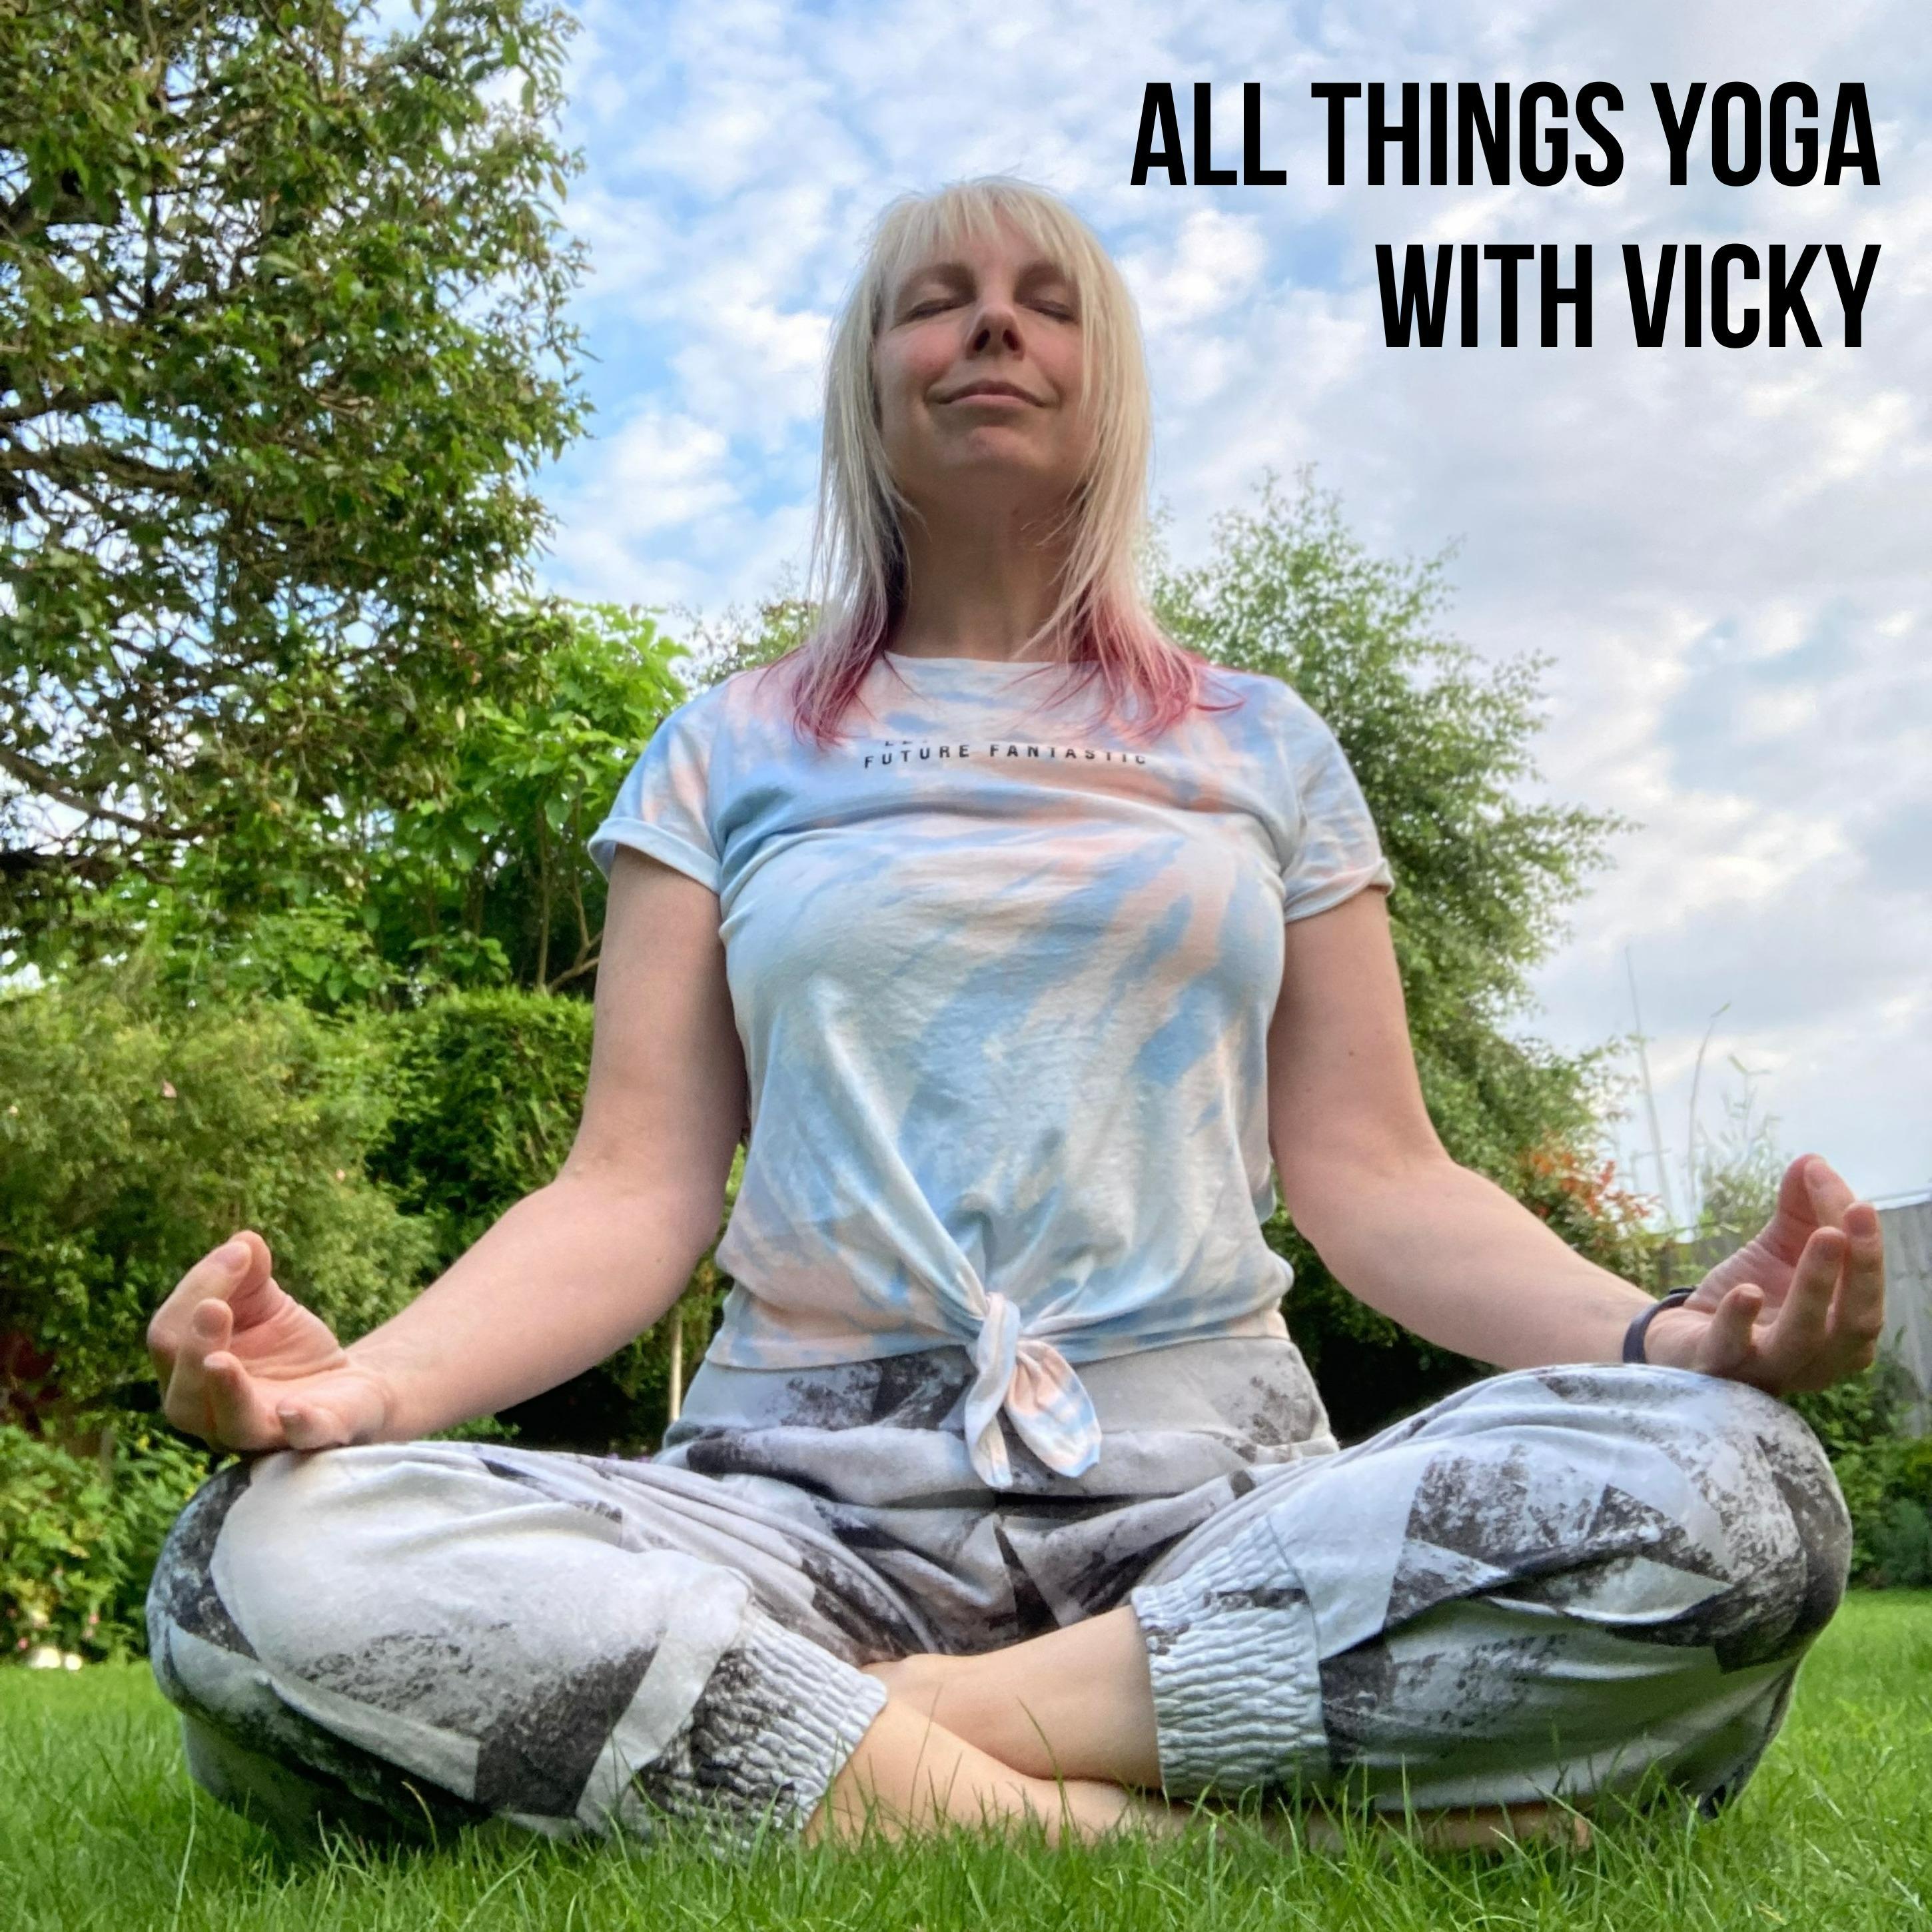 All things Yoga with Vicky